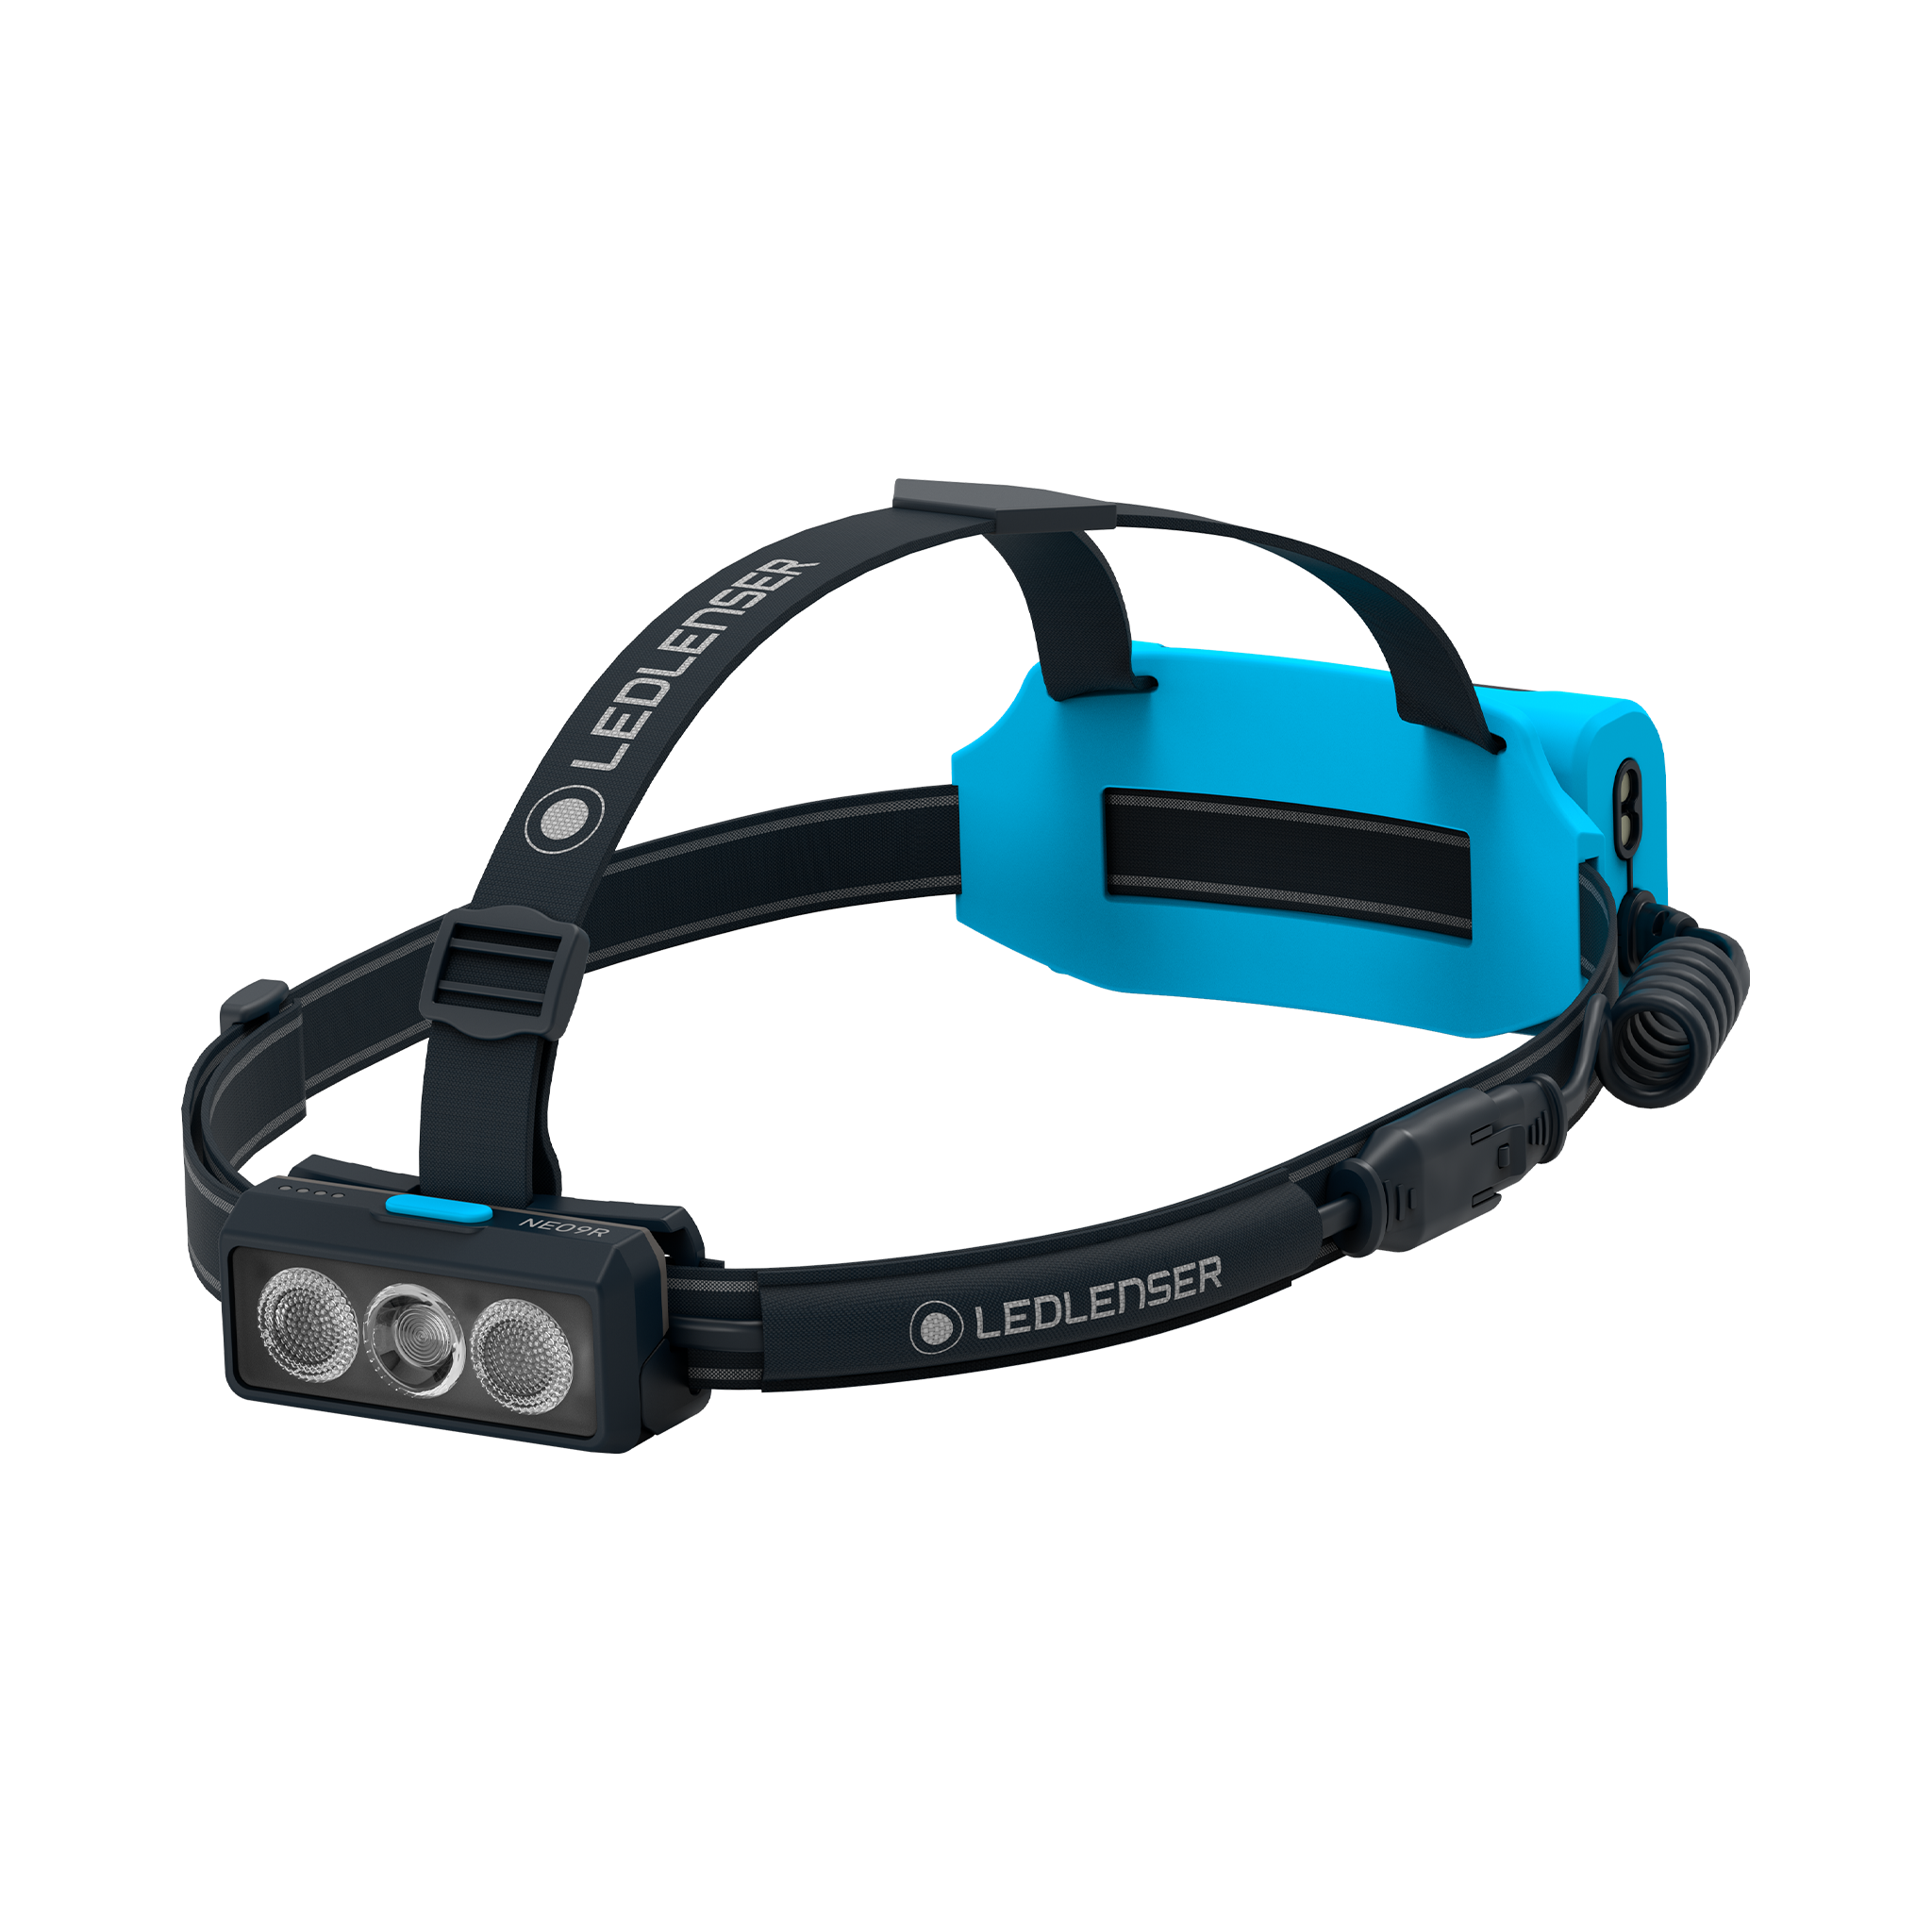 NEO9R Running Head Torch with Chest Strap